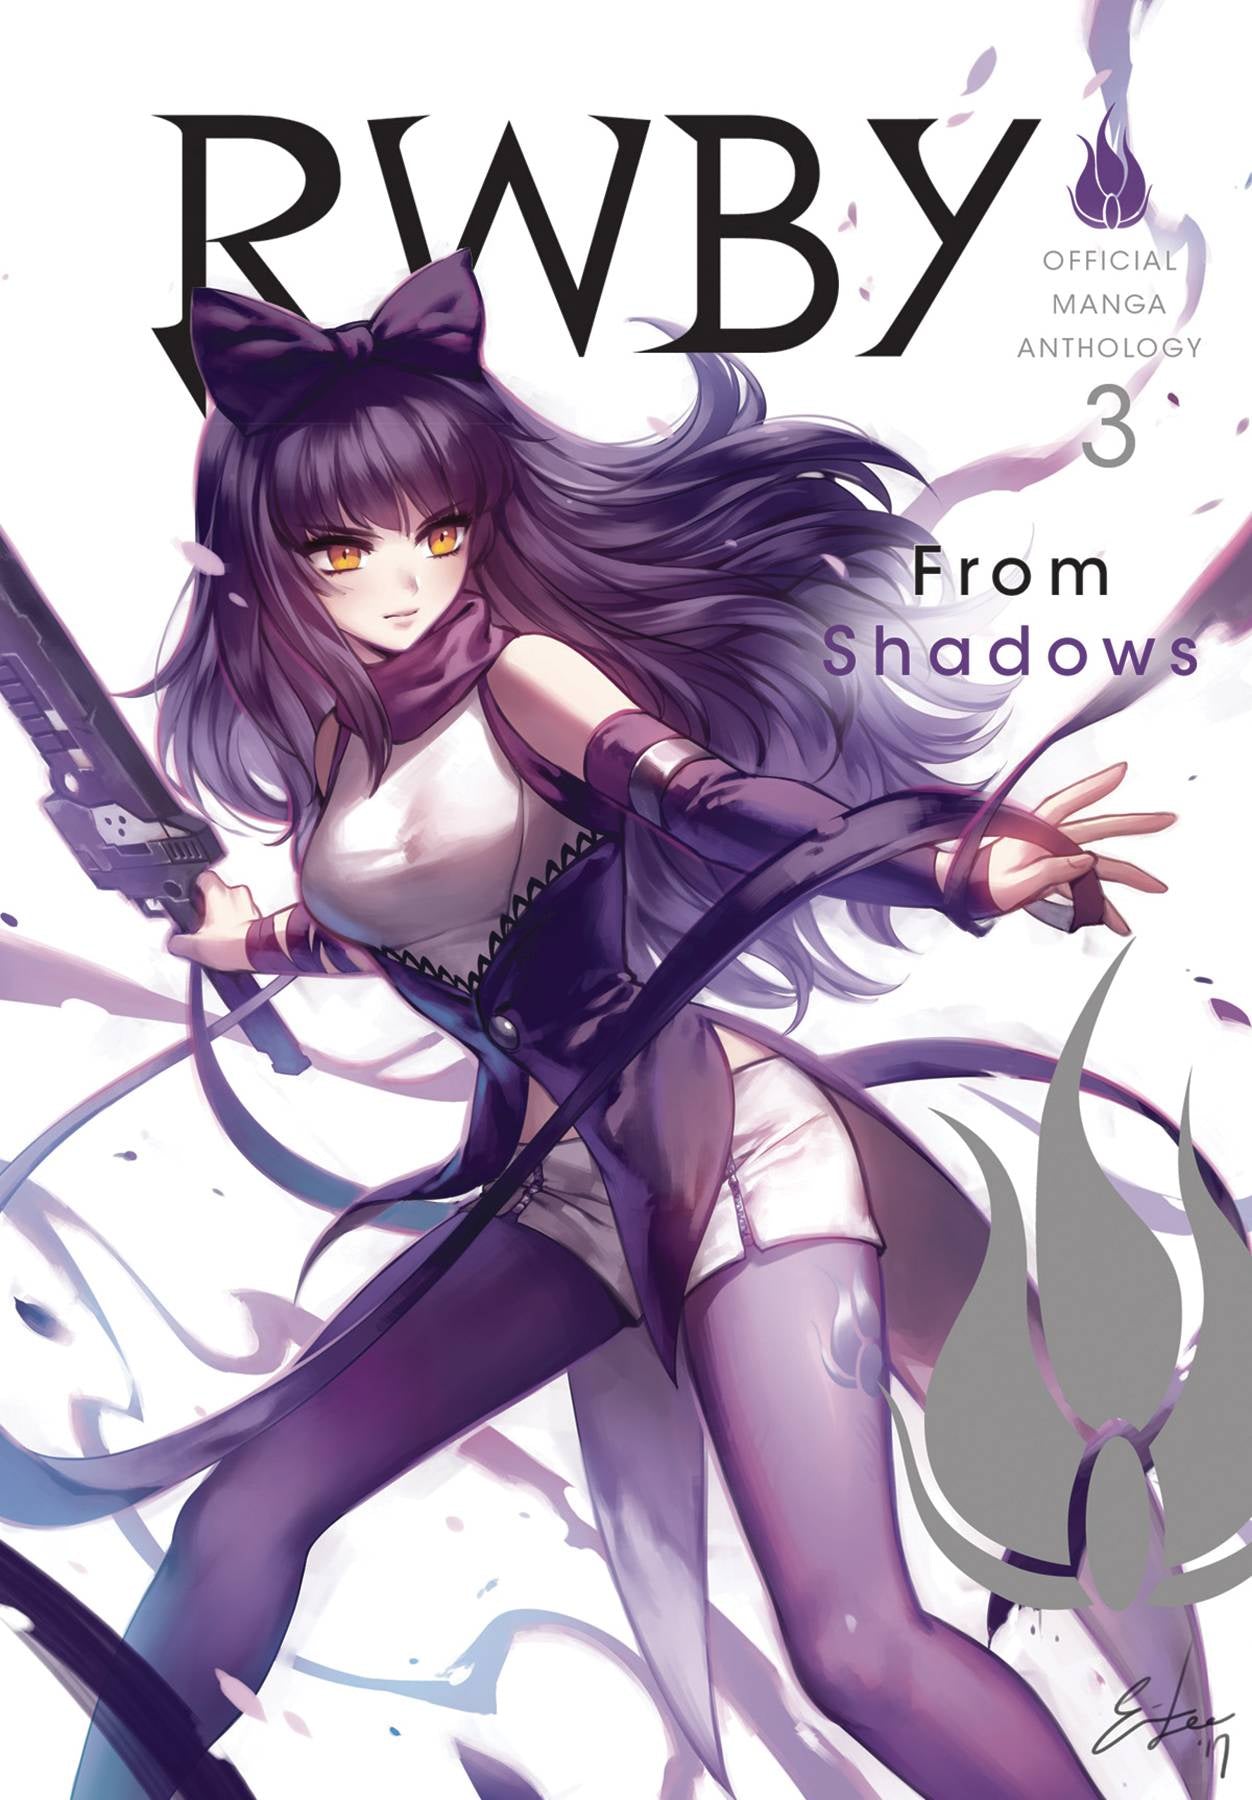 RWBY OFFICIAL MANGA ANTHOLOGY VOLUME 03 FROM SHADOWS